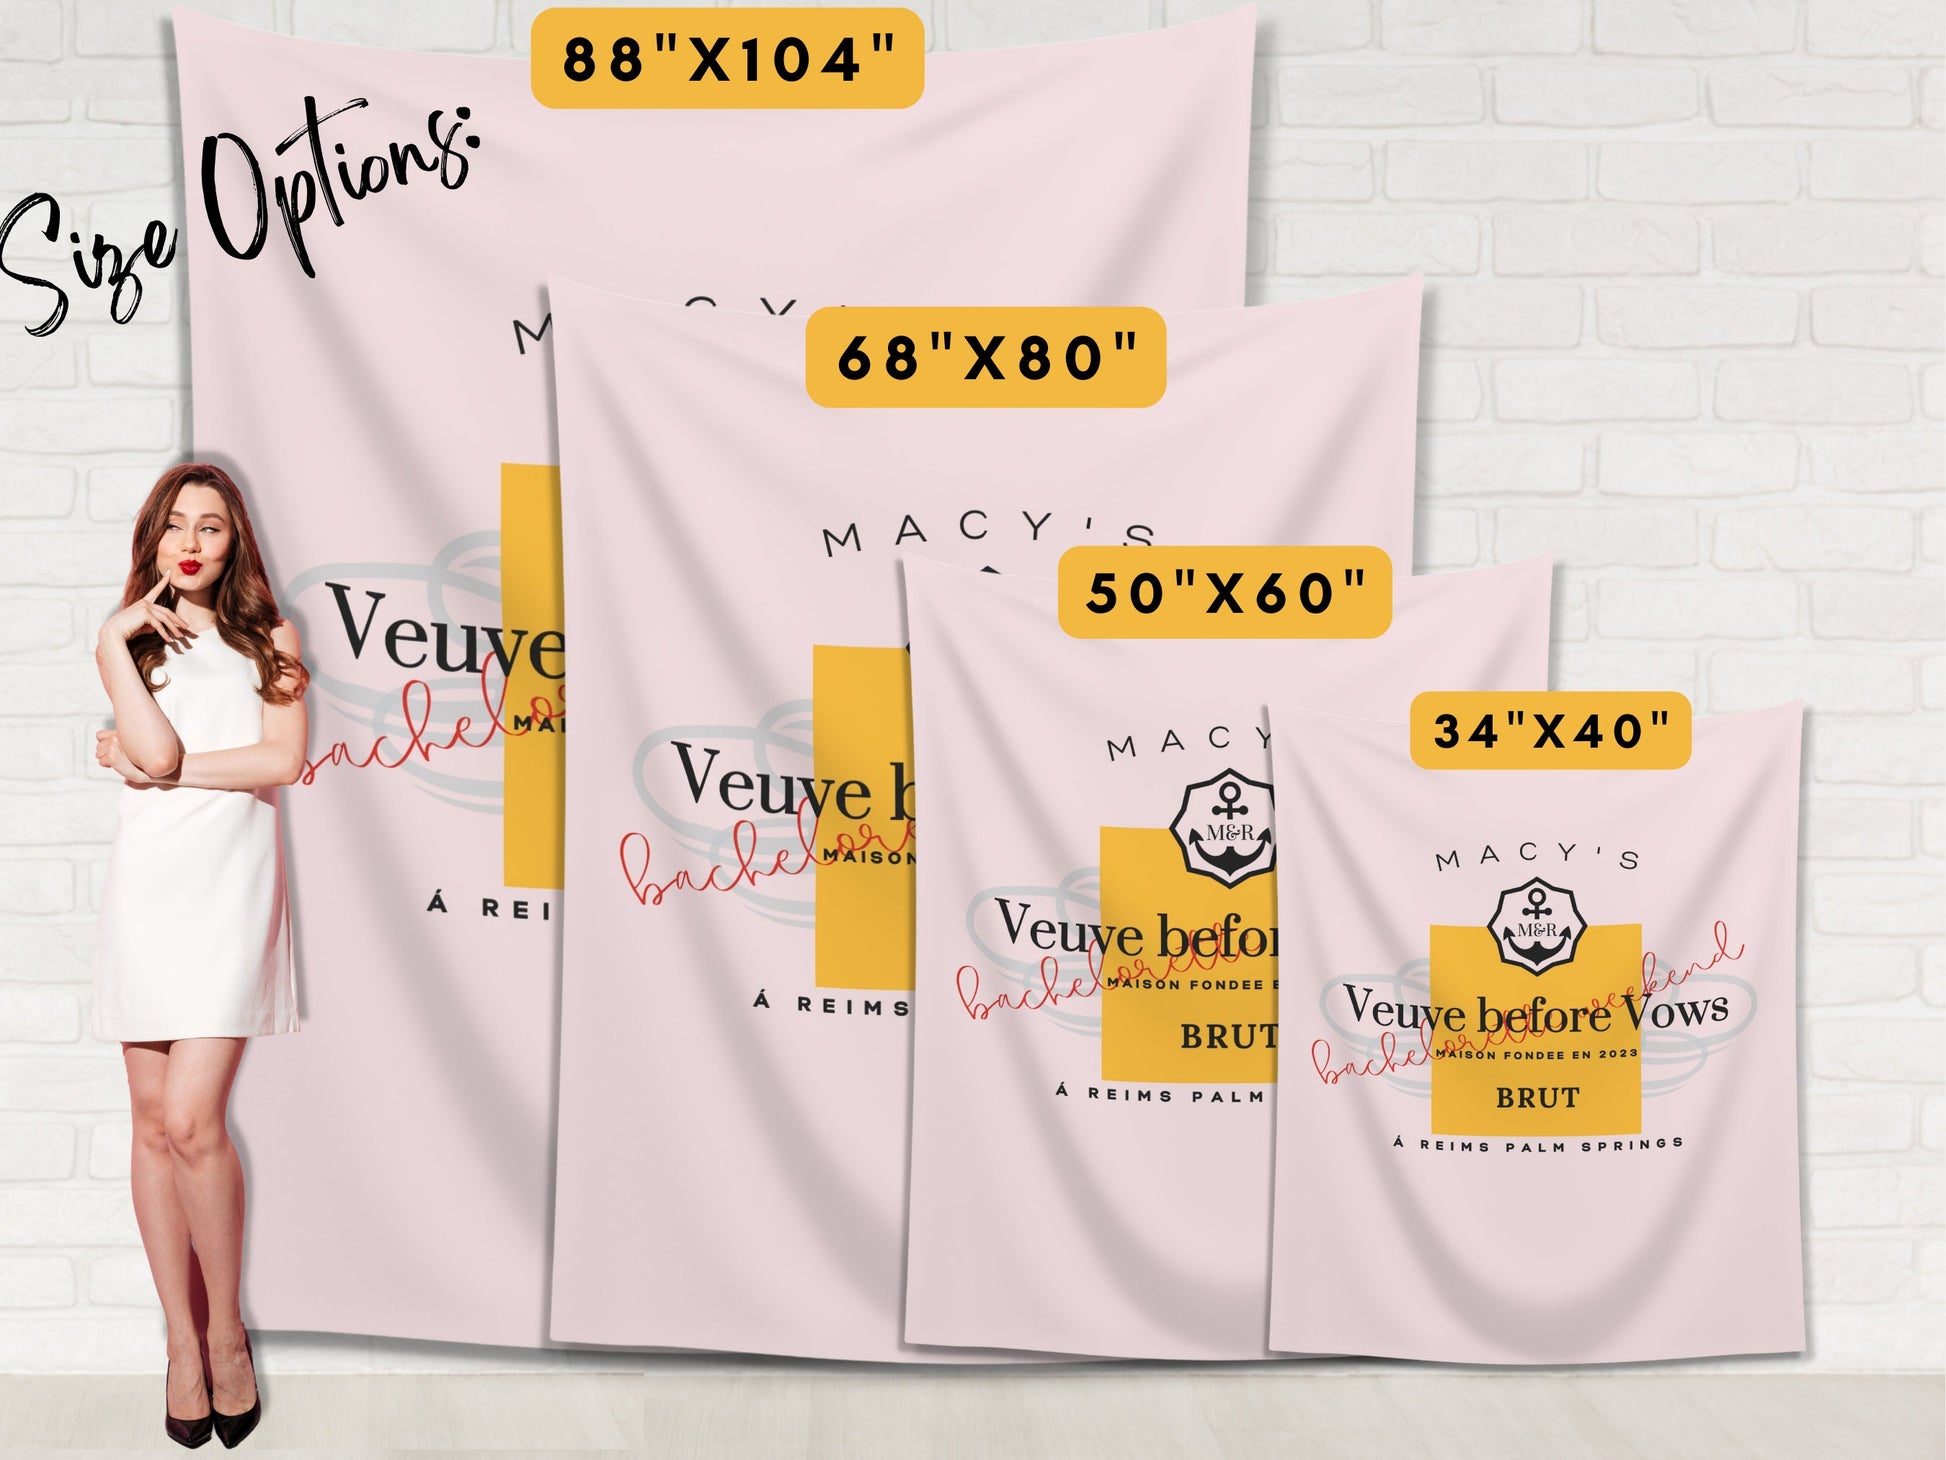 Great Experiential Marketing: Veuve Clicquot's post office party - Because